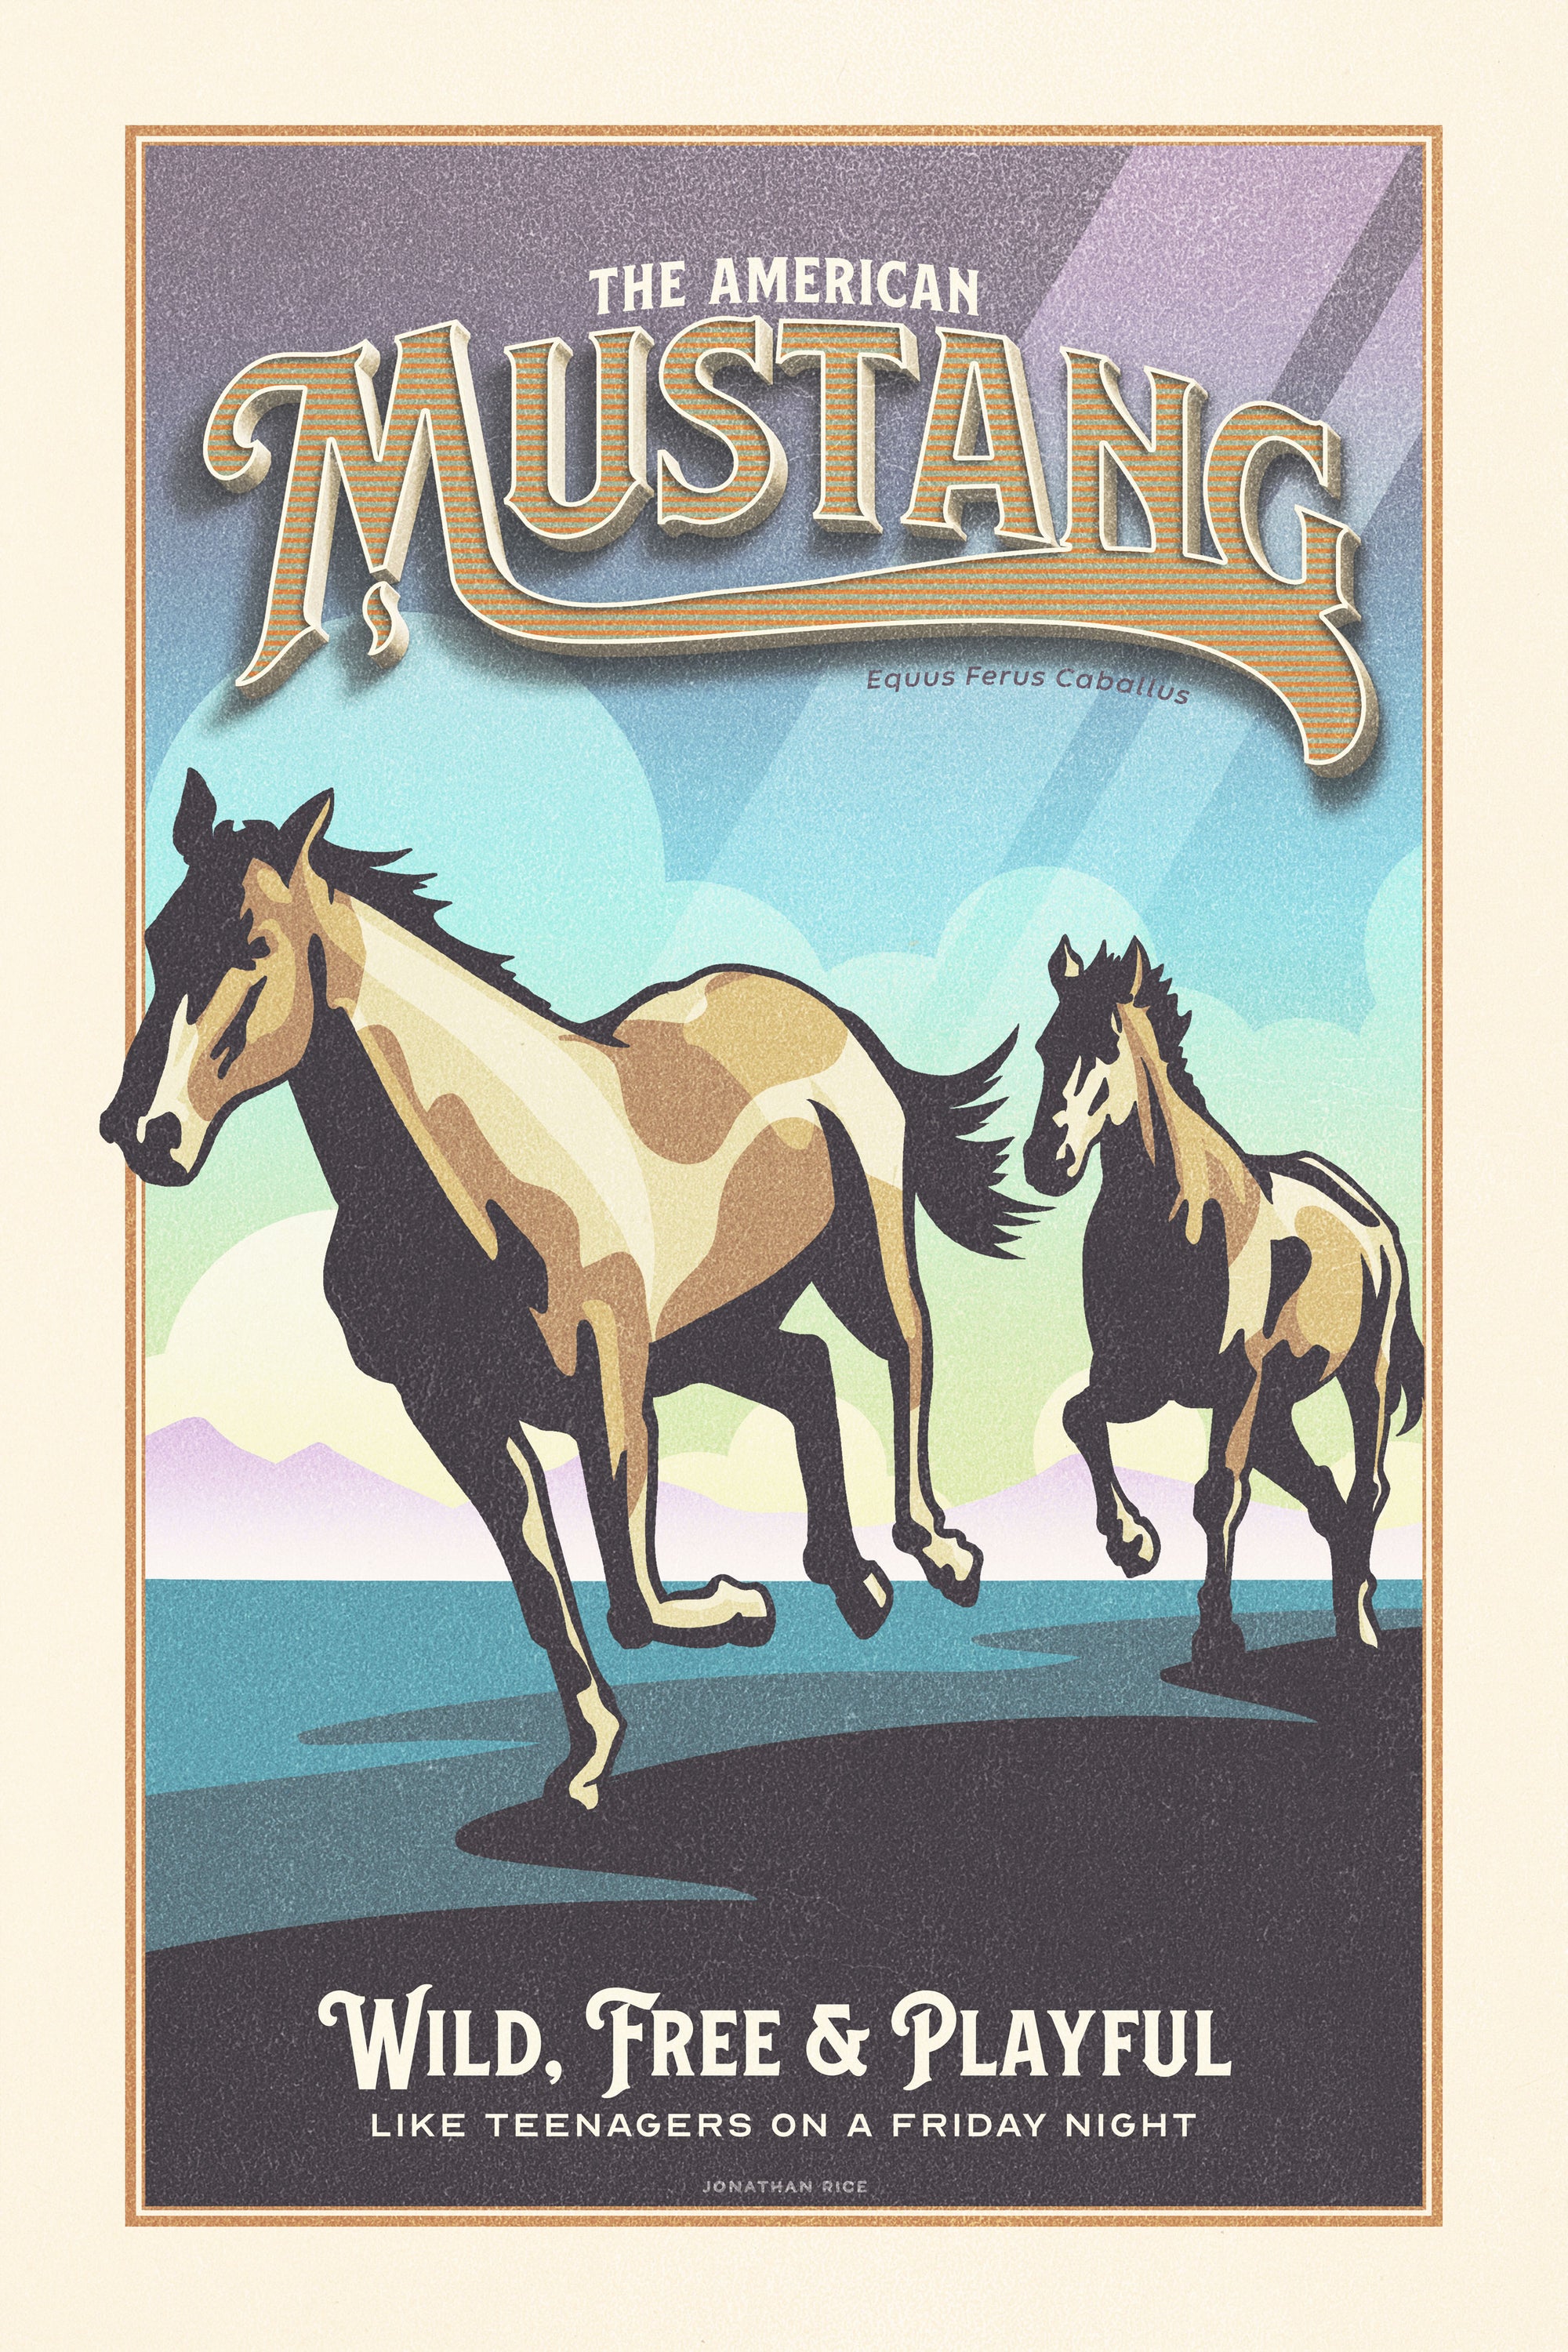 Retro style giclée art print of American Mustangs featuring a mare and foal running in the wild. It has bright colors, textures, and ornate typography, with a headline that says “The American Mustang”.  At the bottom the type says “Wild, Free and Playful. Like teenagers on a Friday night.”